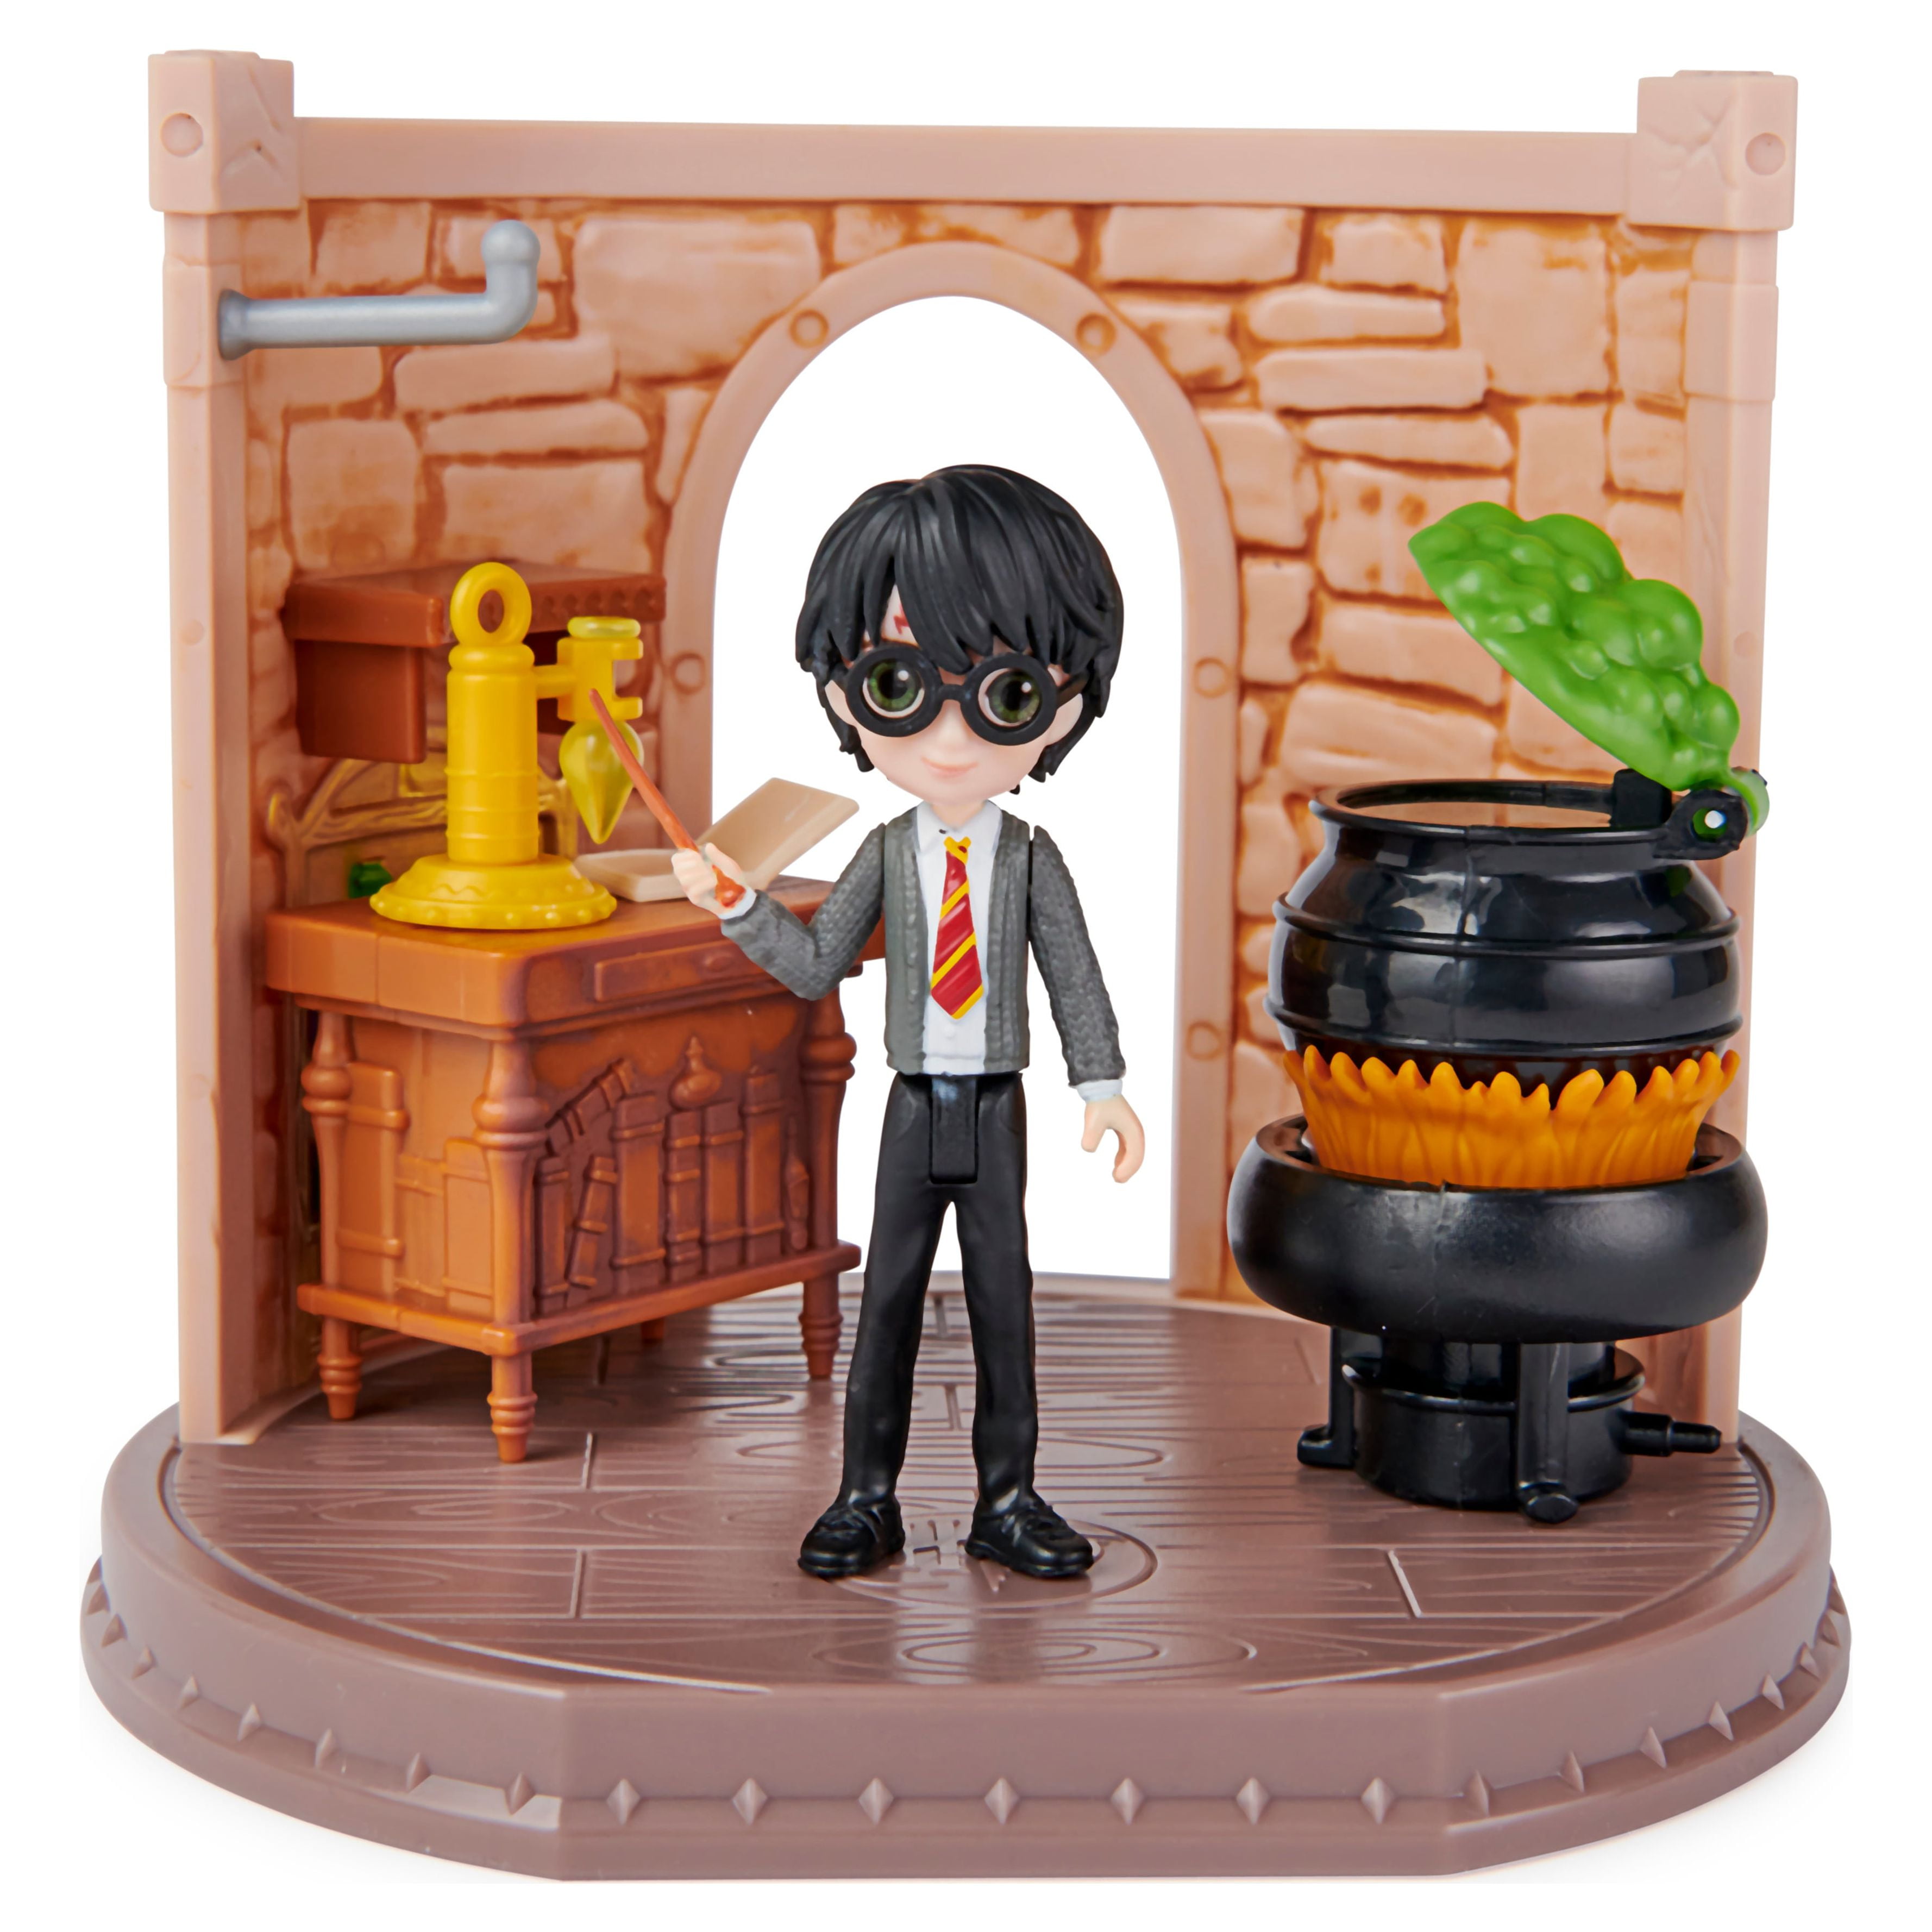 Wizarding World Harry Potter Magical Mini Potions Classroom Playset $3.47 + Free S&H w/ Walmart+ or $35+